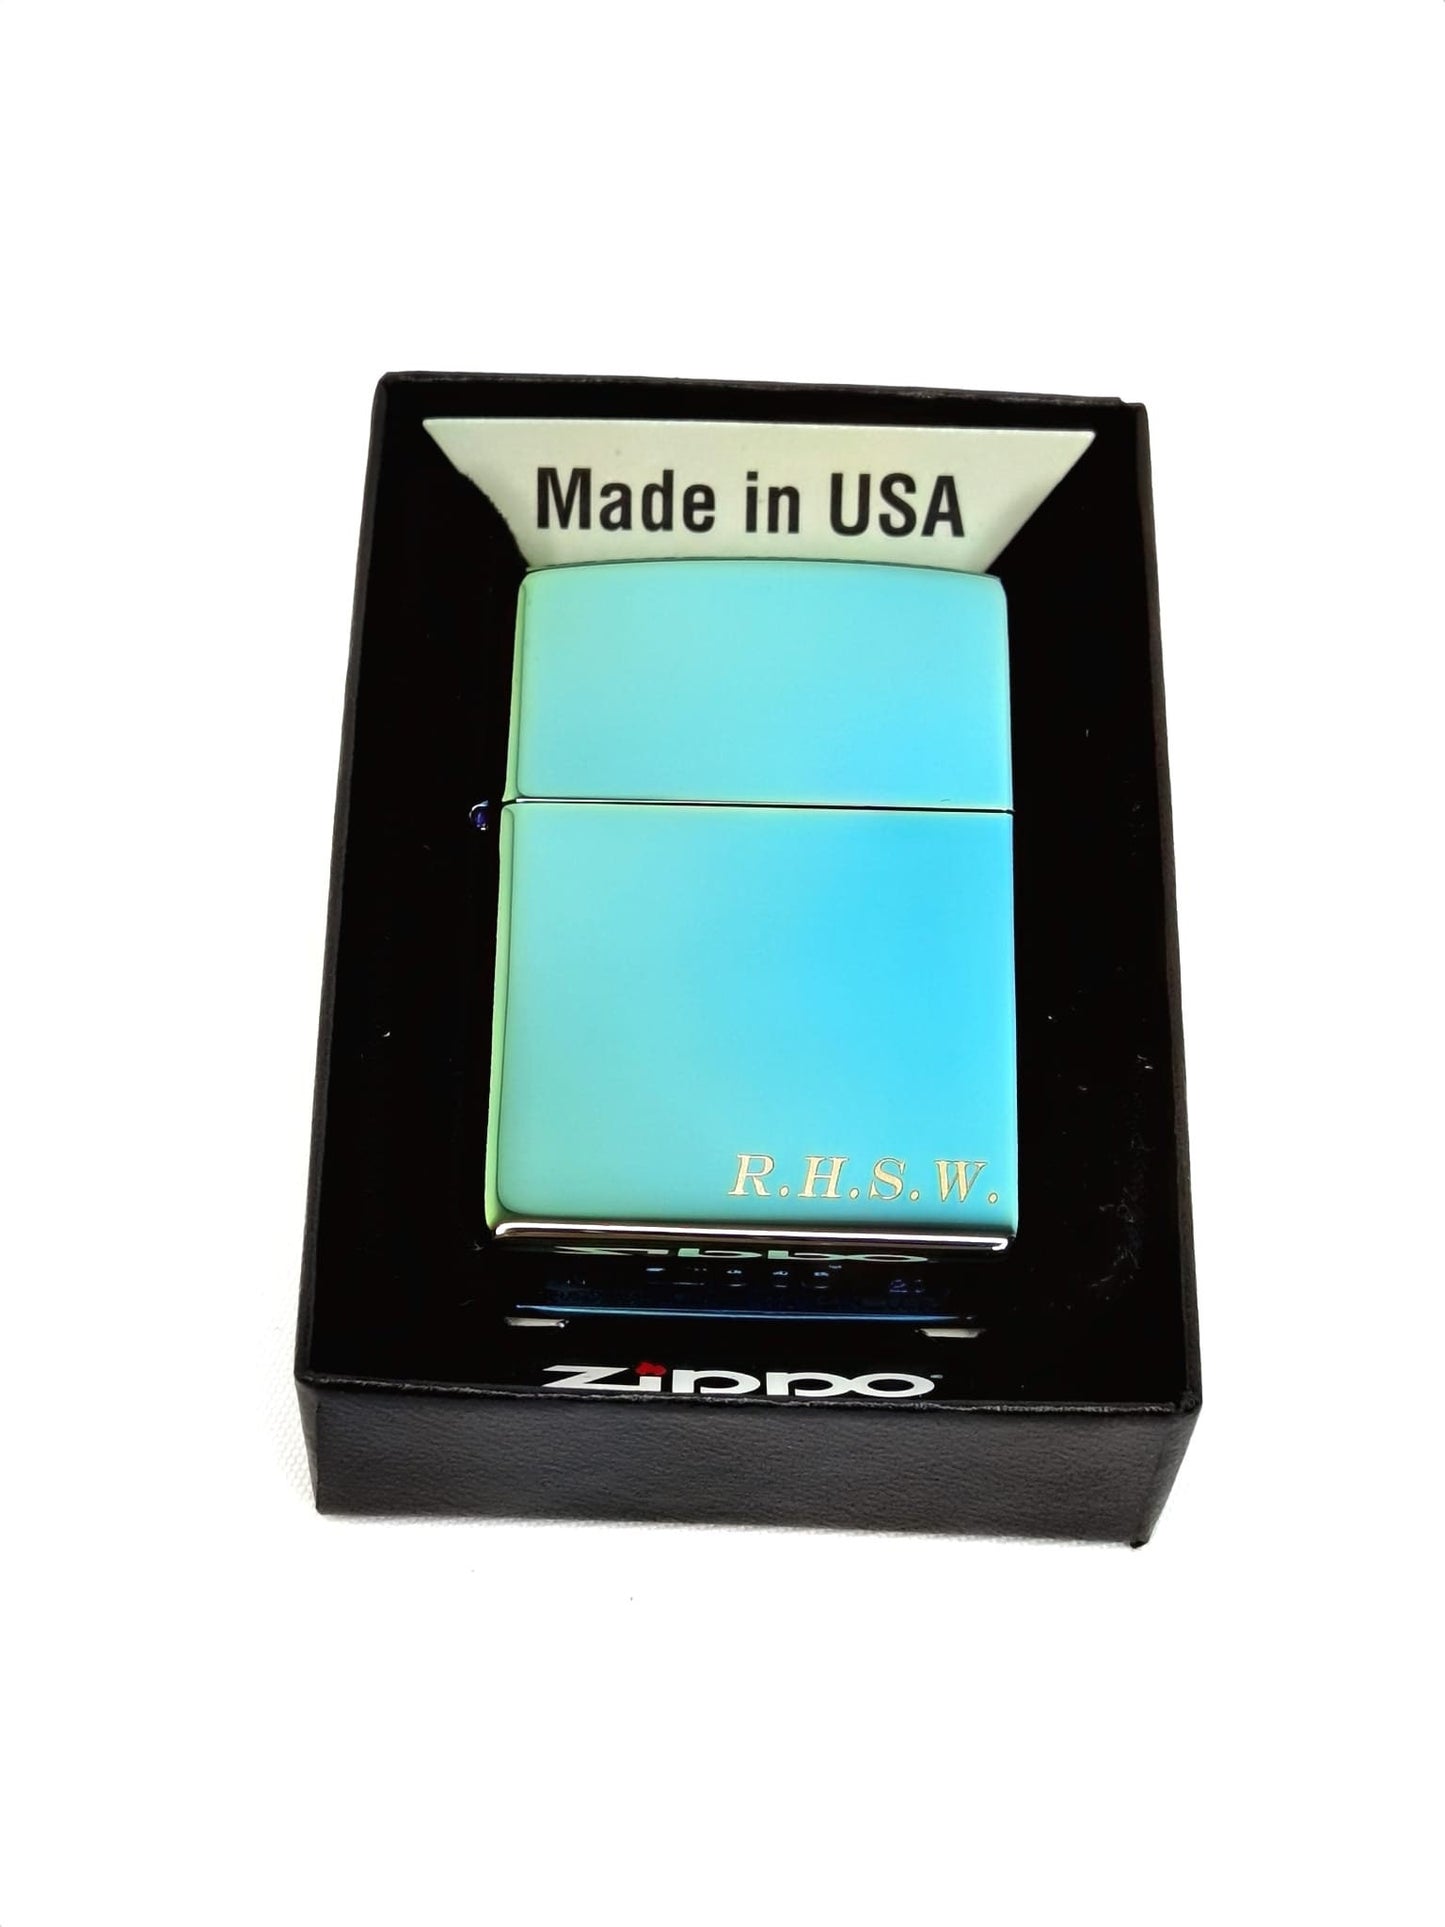 Genuine Zippo Lighter Personalised, High Polished Teal Customised Zippo in Gift Box